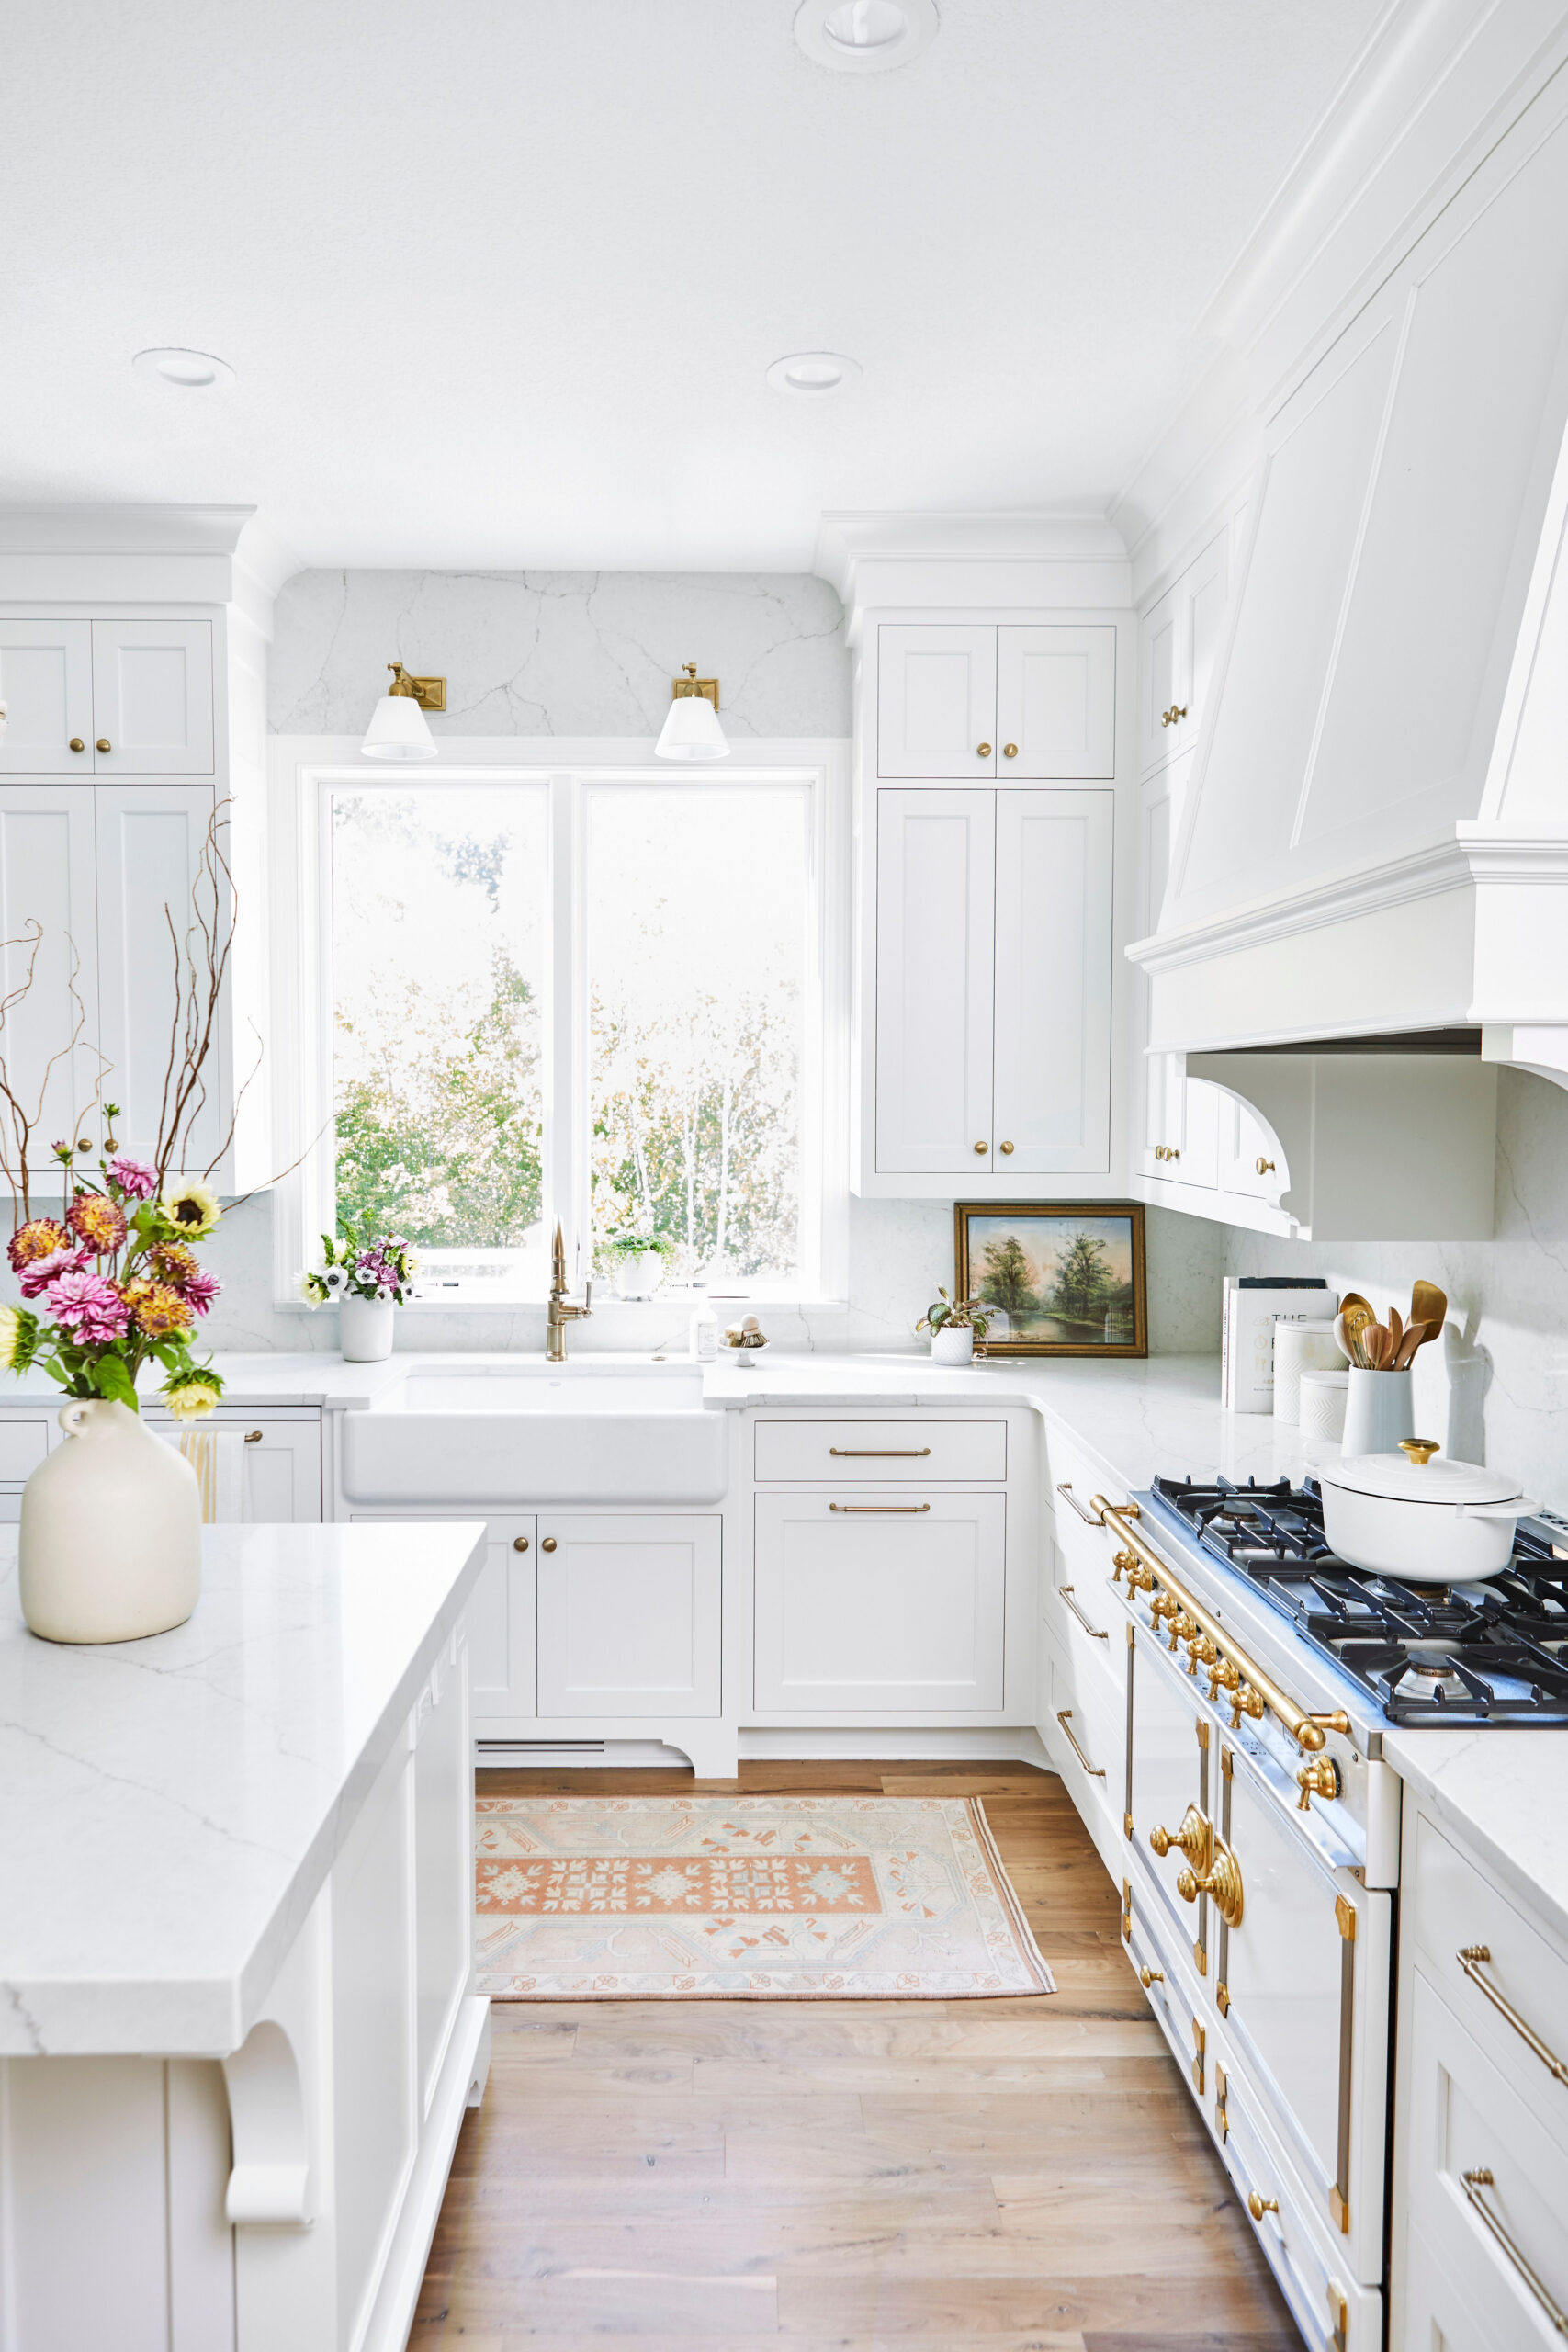 Traditional Kitchen Ideas That Stand the Test of Time